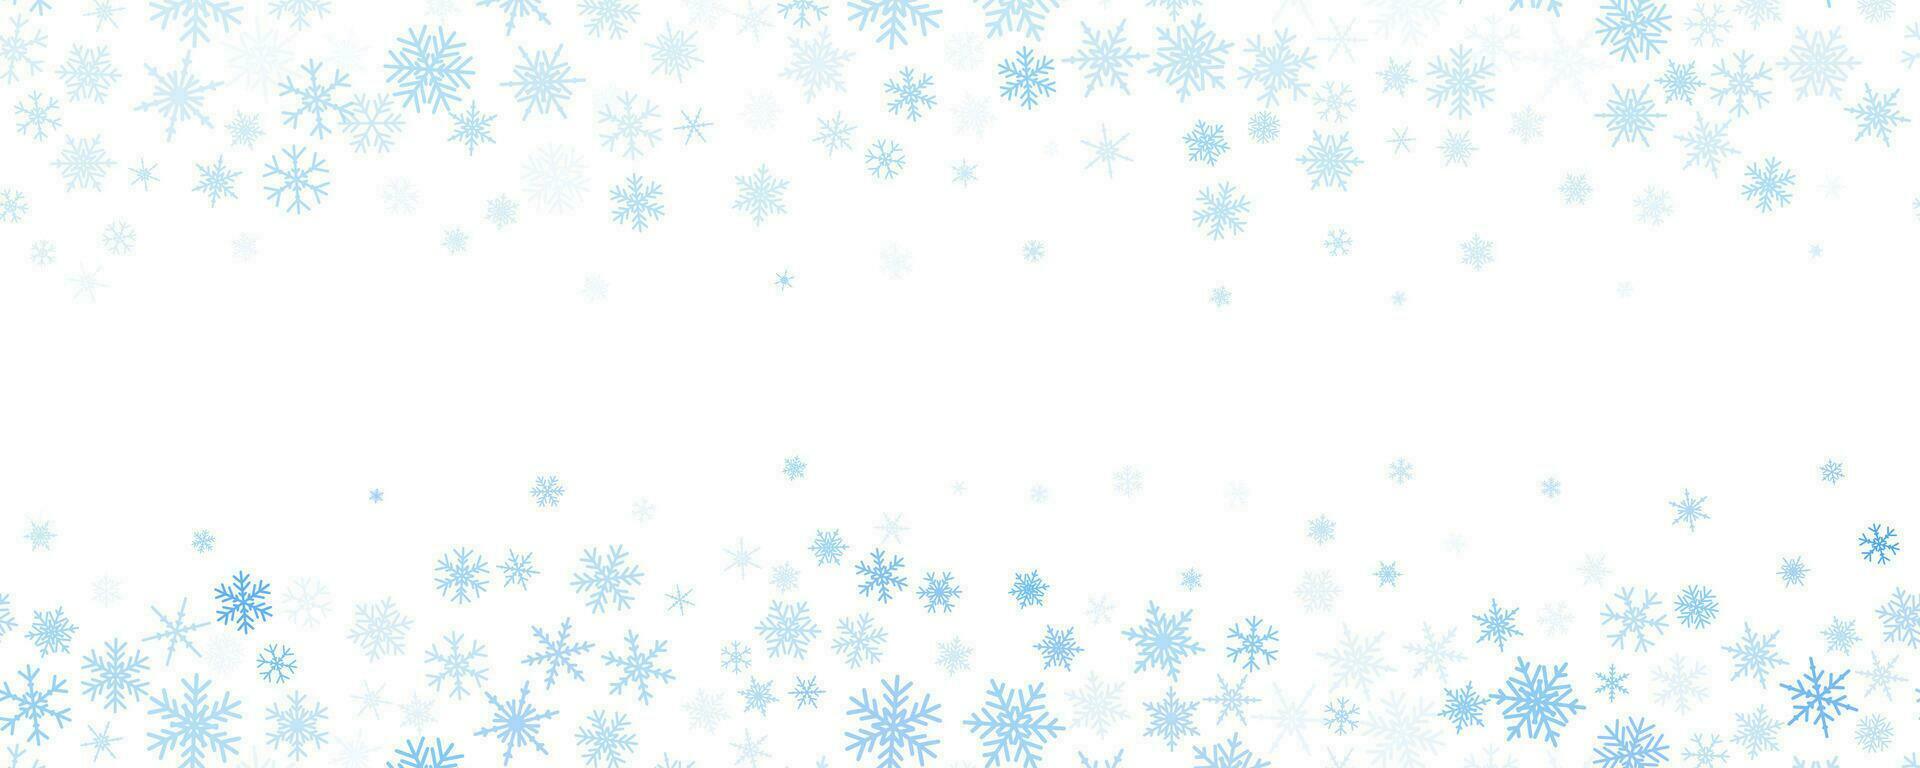 Snowflakes vector background. Winter holiday decor with blue crystal elements. Graphic icy frame isolated on white backdrop.